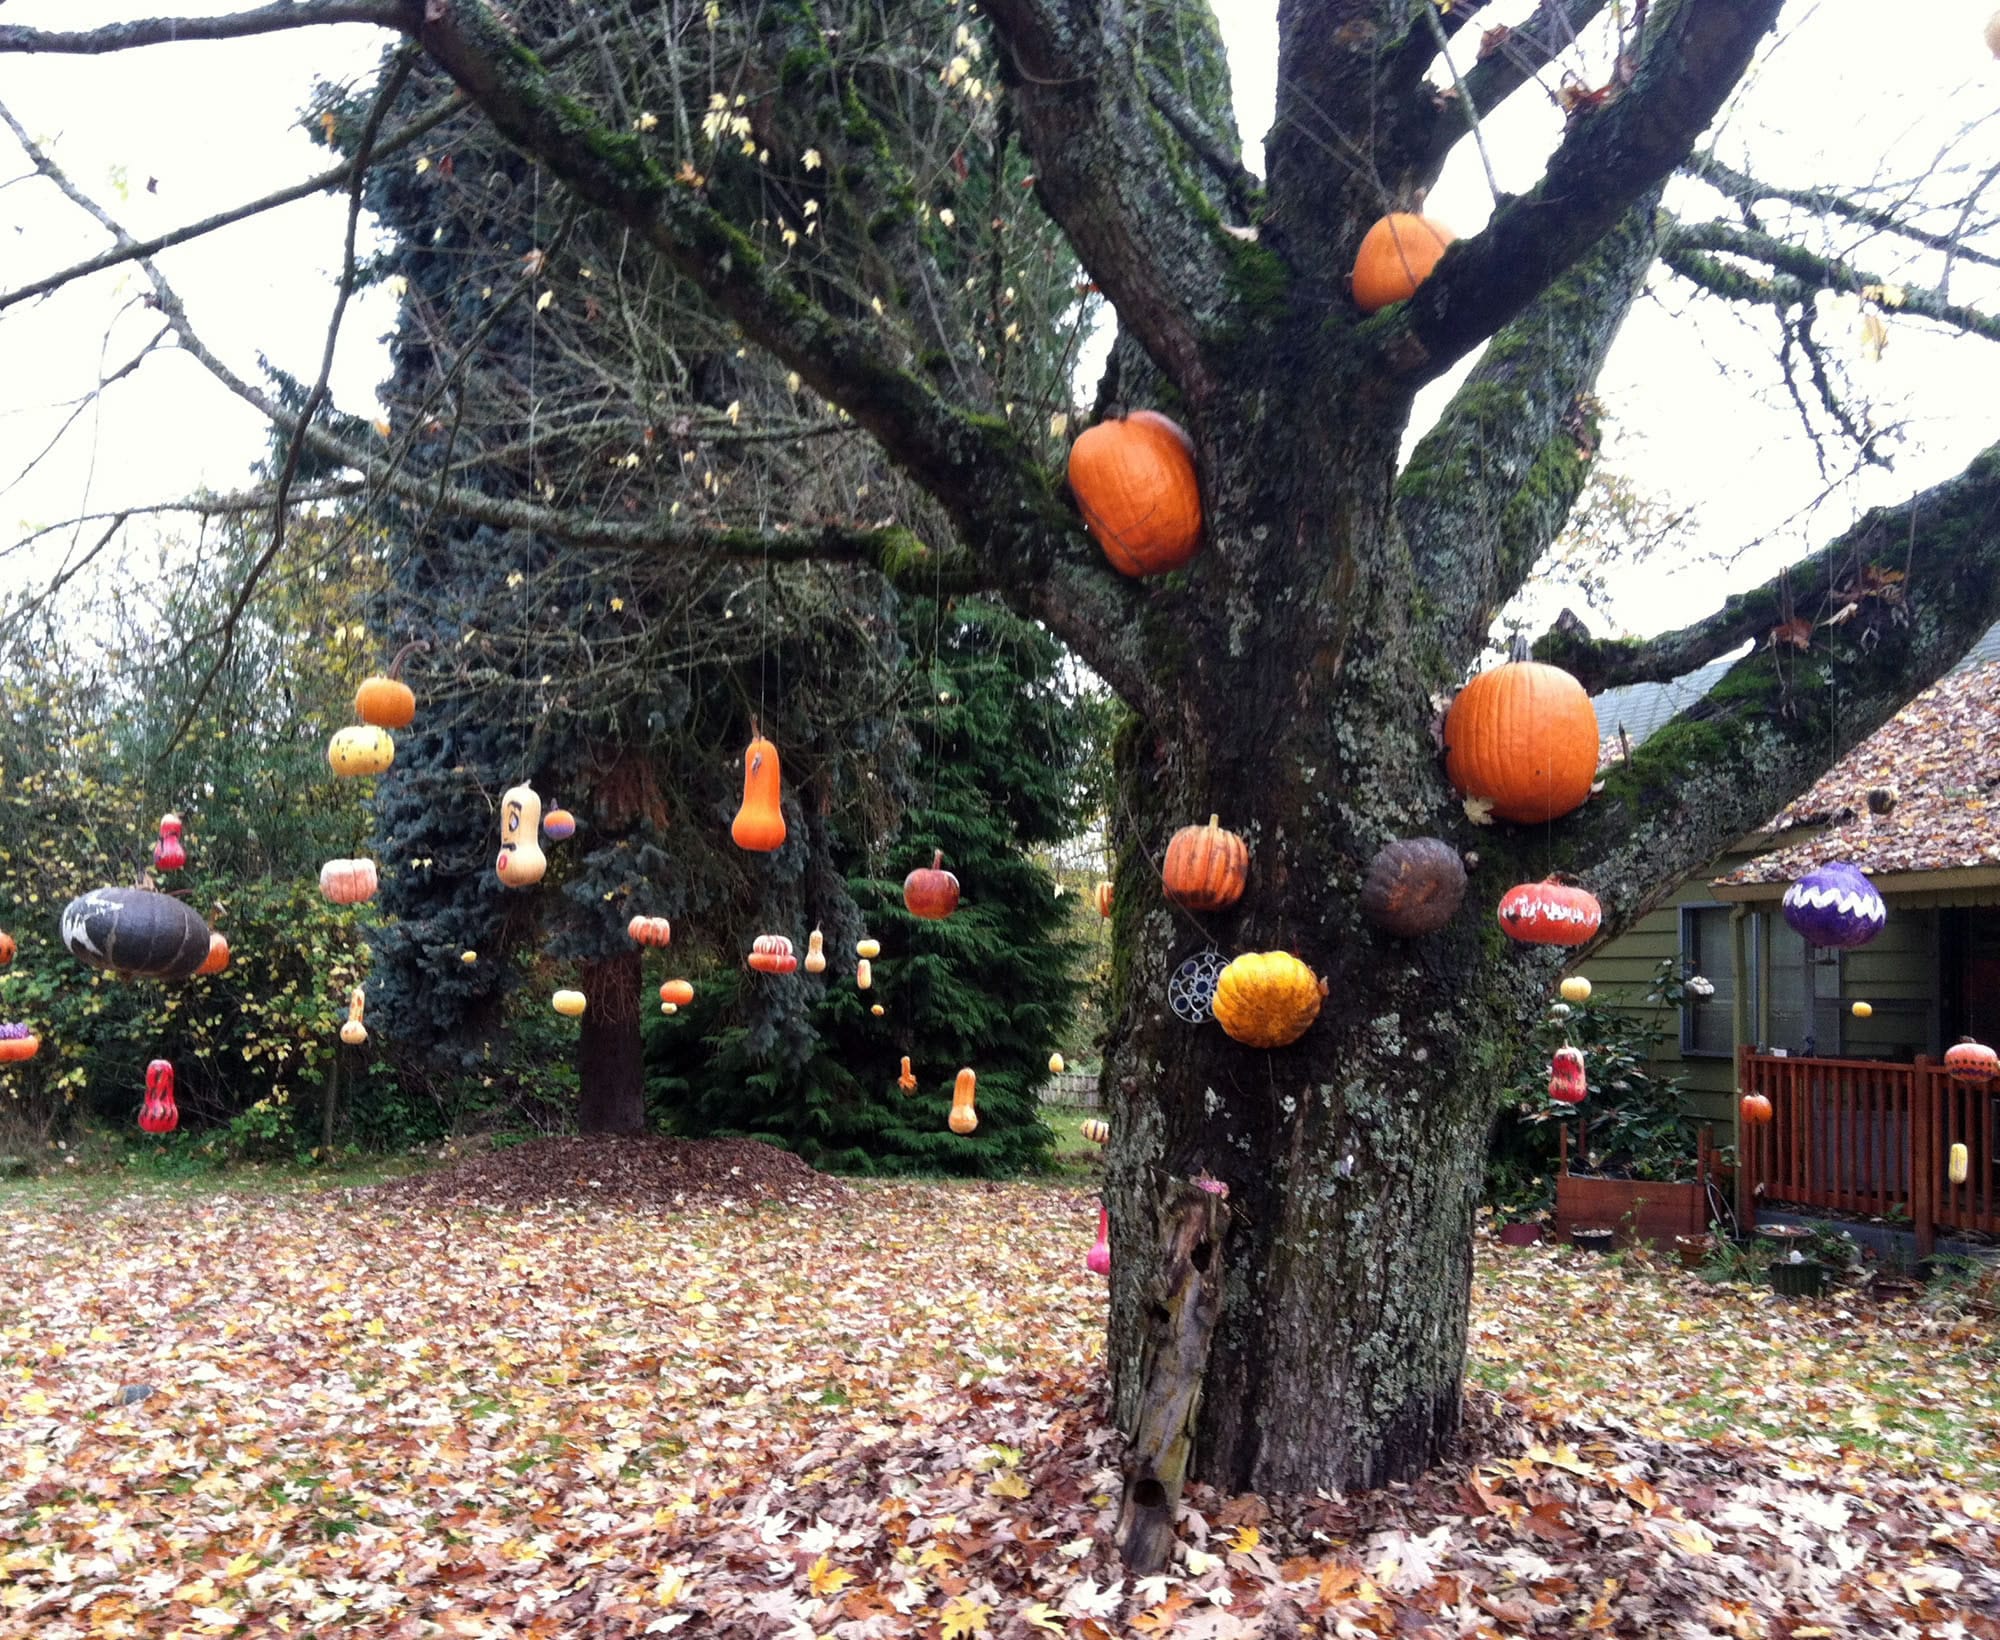 Ridgefield -- Neighbors, friends and families helped Kara Breuer with her eight-year tradition of hanging pumpkins and gourds from trees in her front yard.